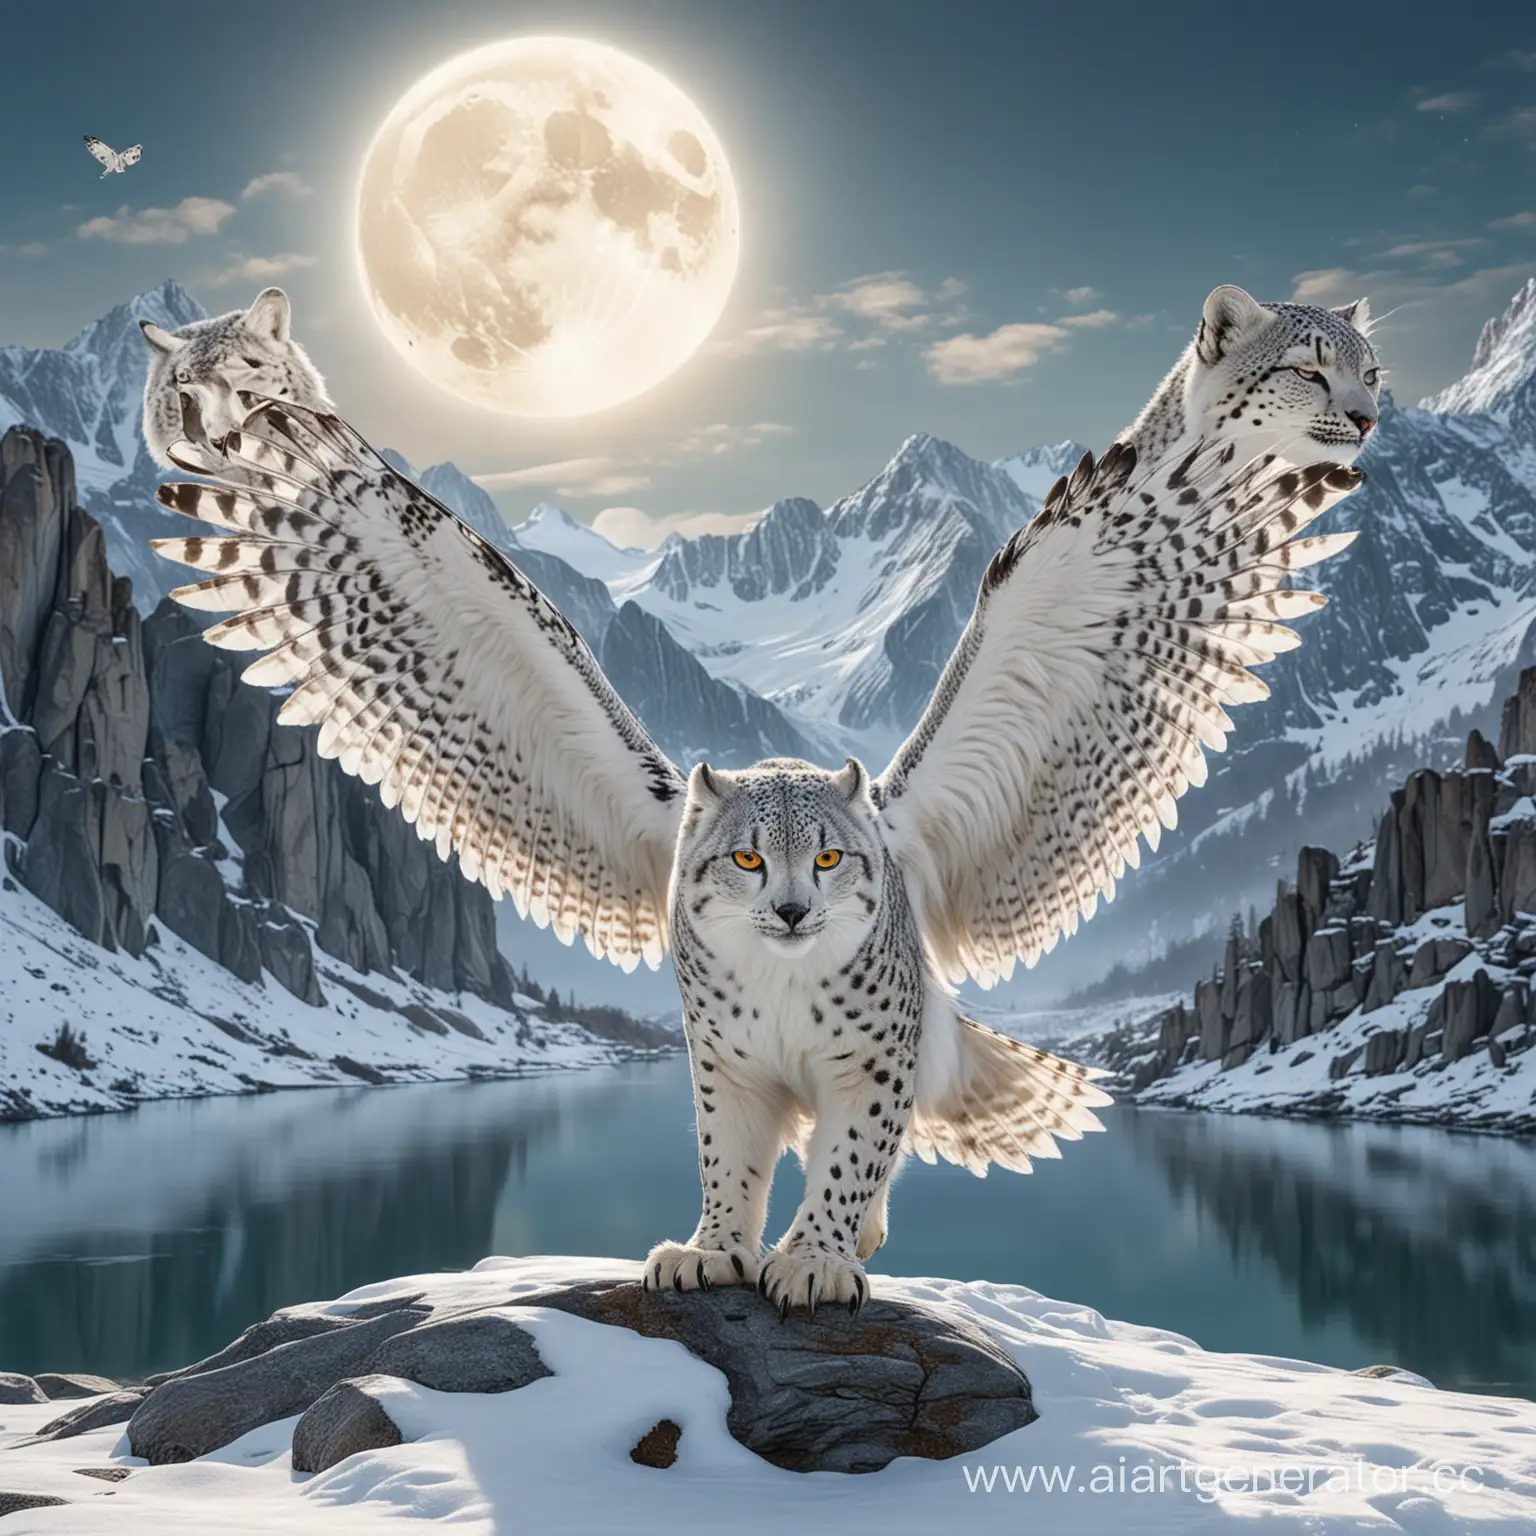 a polar owl bird with the body of a snow leopard, wings open, stands against the background of the moon in fabulous mountains, andscape featuring a picturesque lake under a bright, snowy sky., photorealistic quality